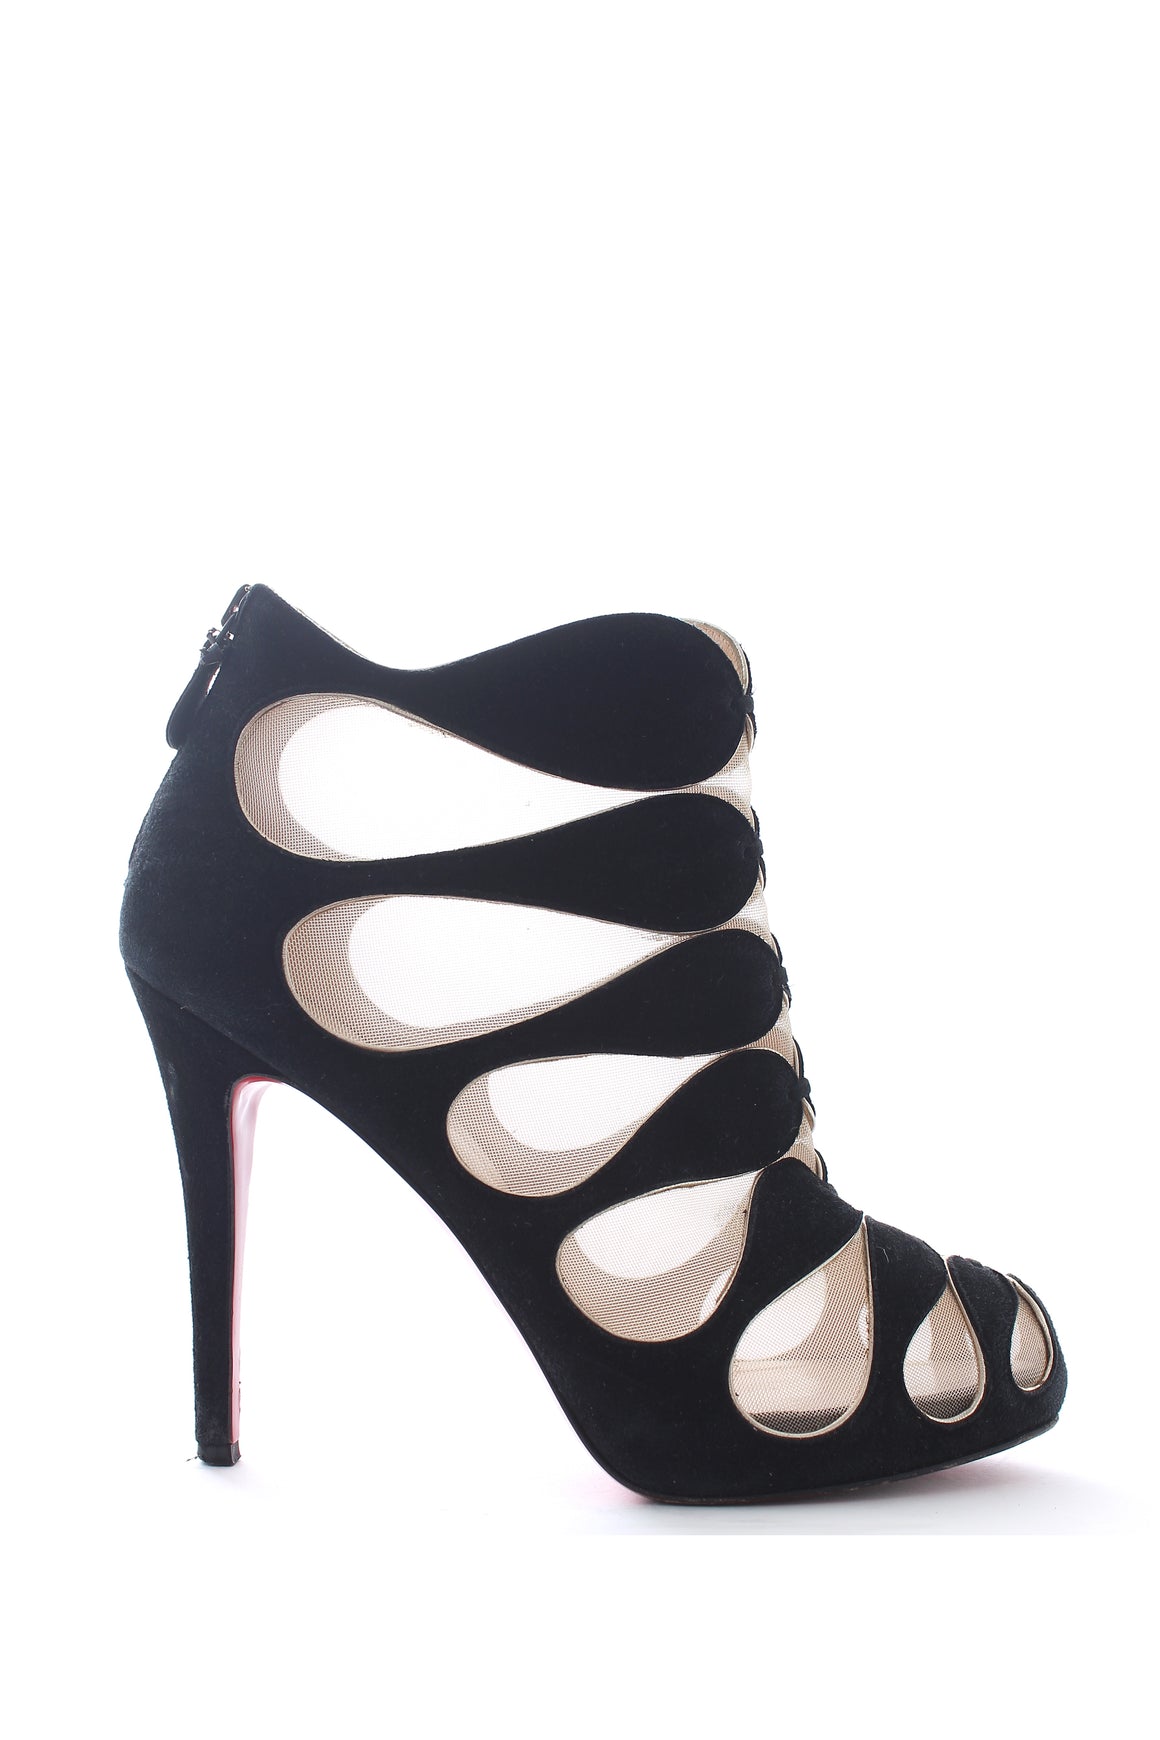 Christian Louboutin Circus Suede and Mesh Cutout Ankle Boots